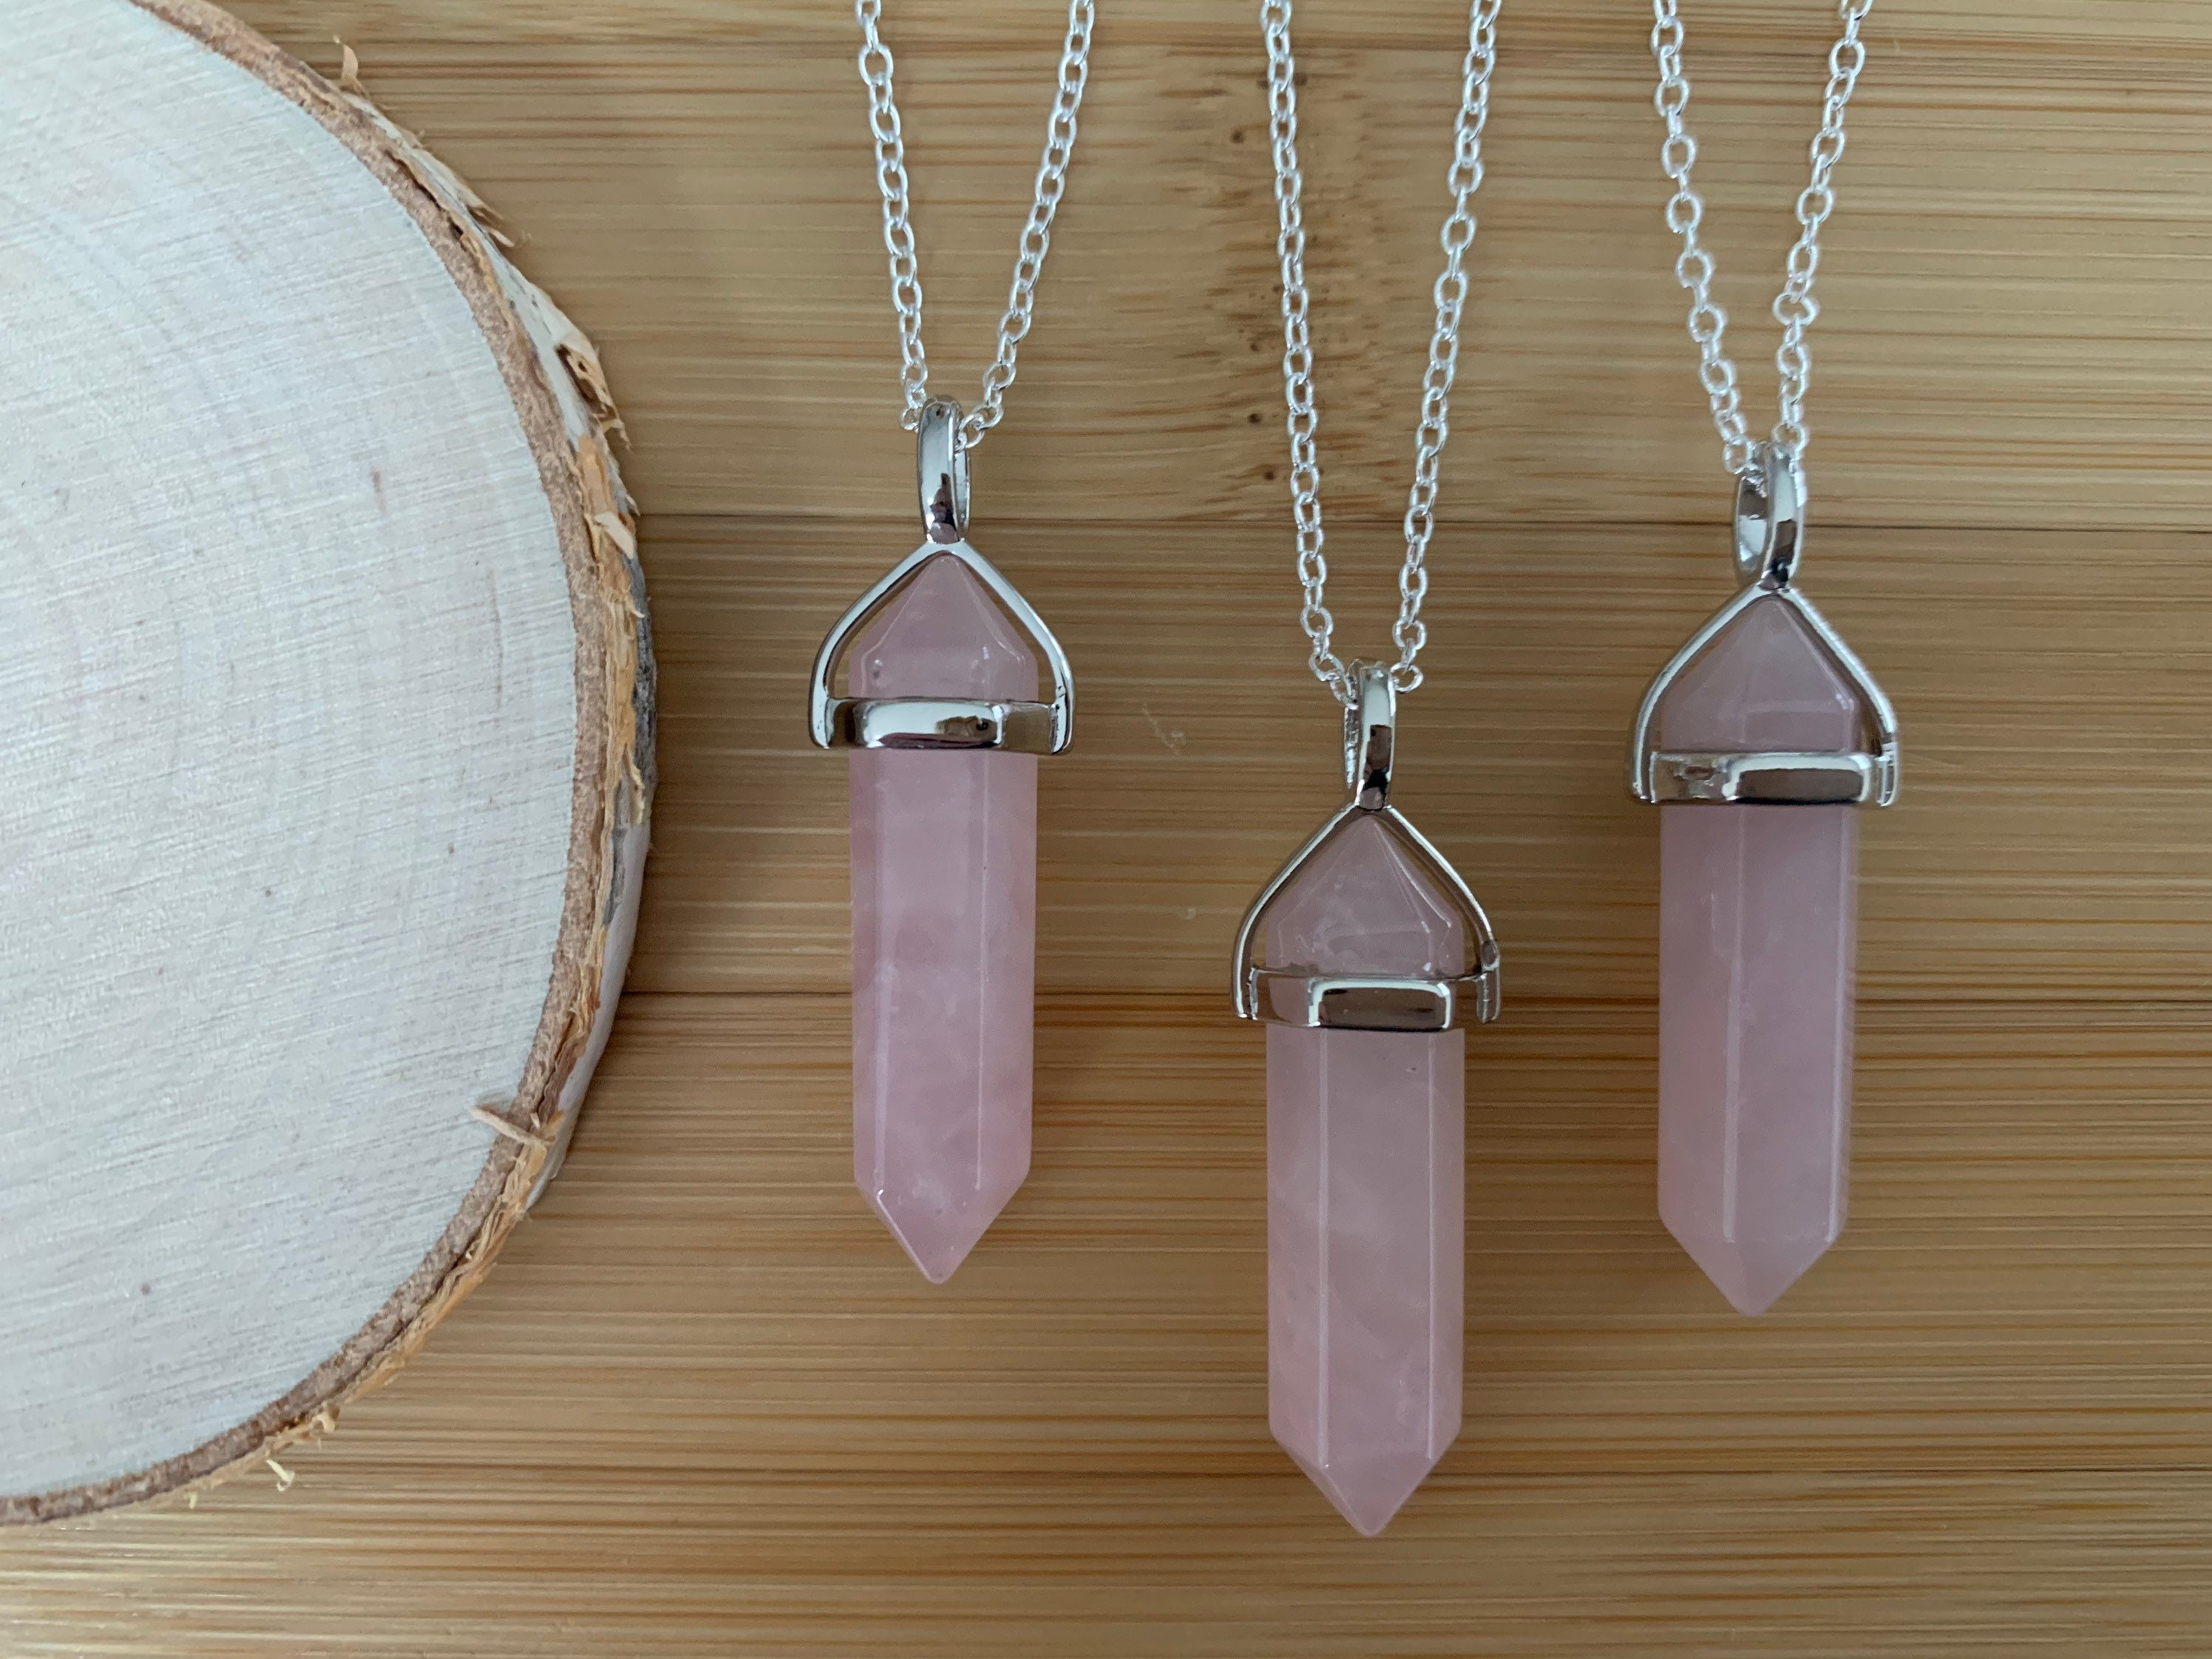 sterling silver chain nature lover gift minimalist jewelry yoga lover gift chip bead necklace Rose quartz necklace natural gemstones